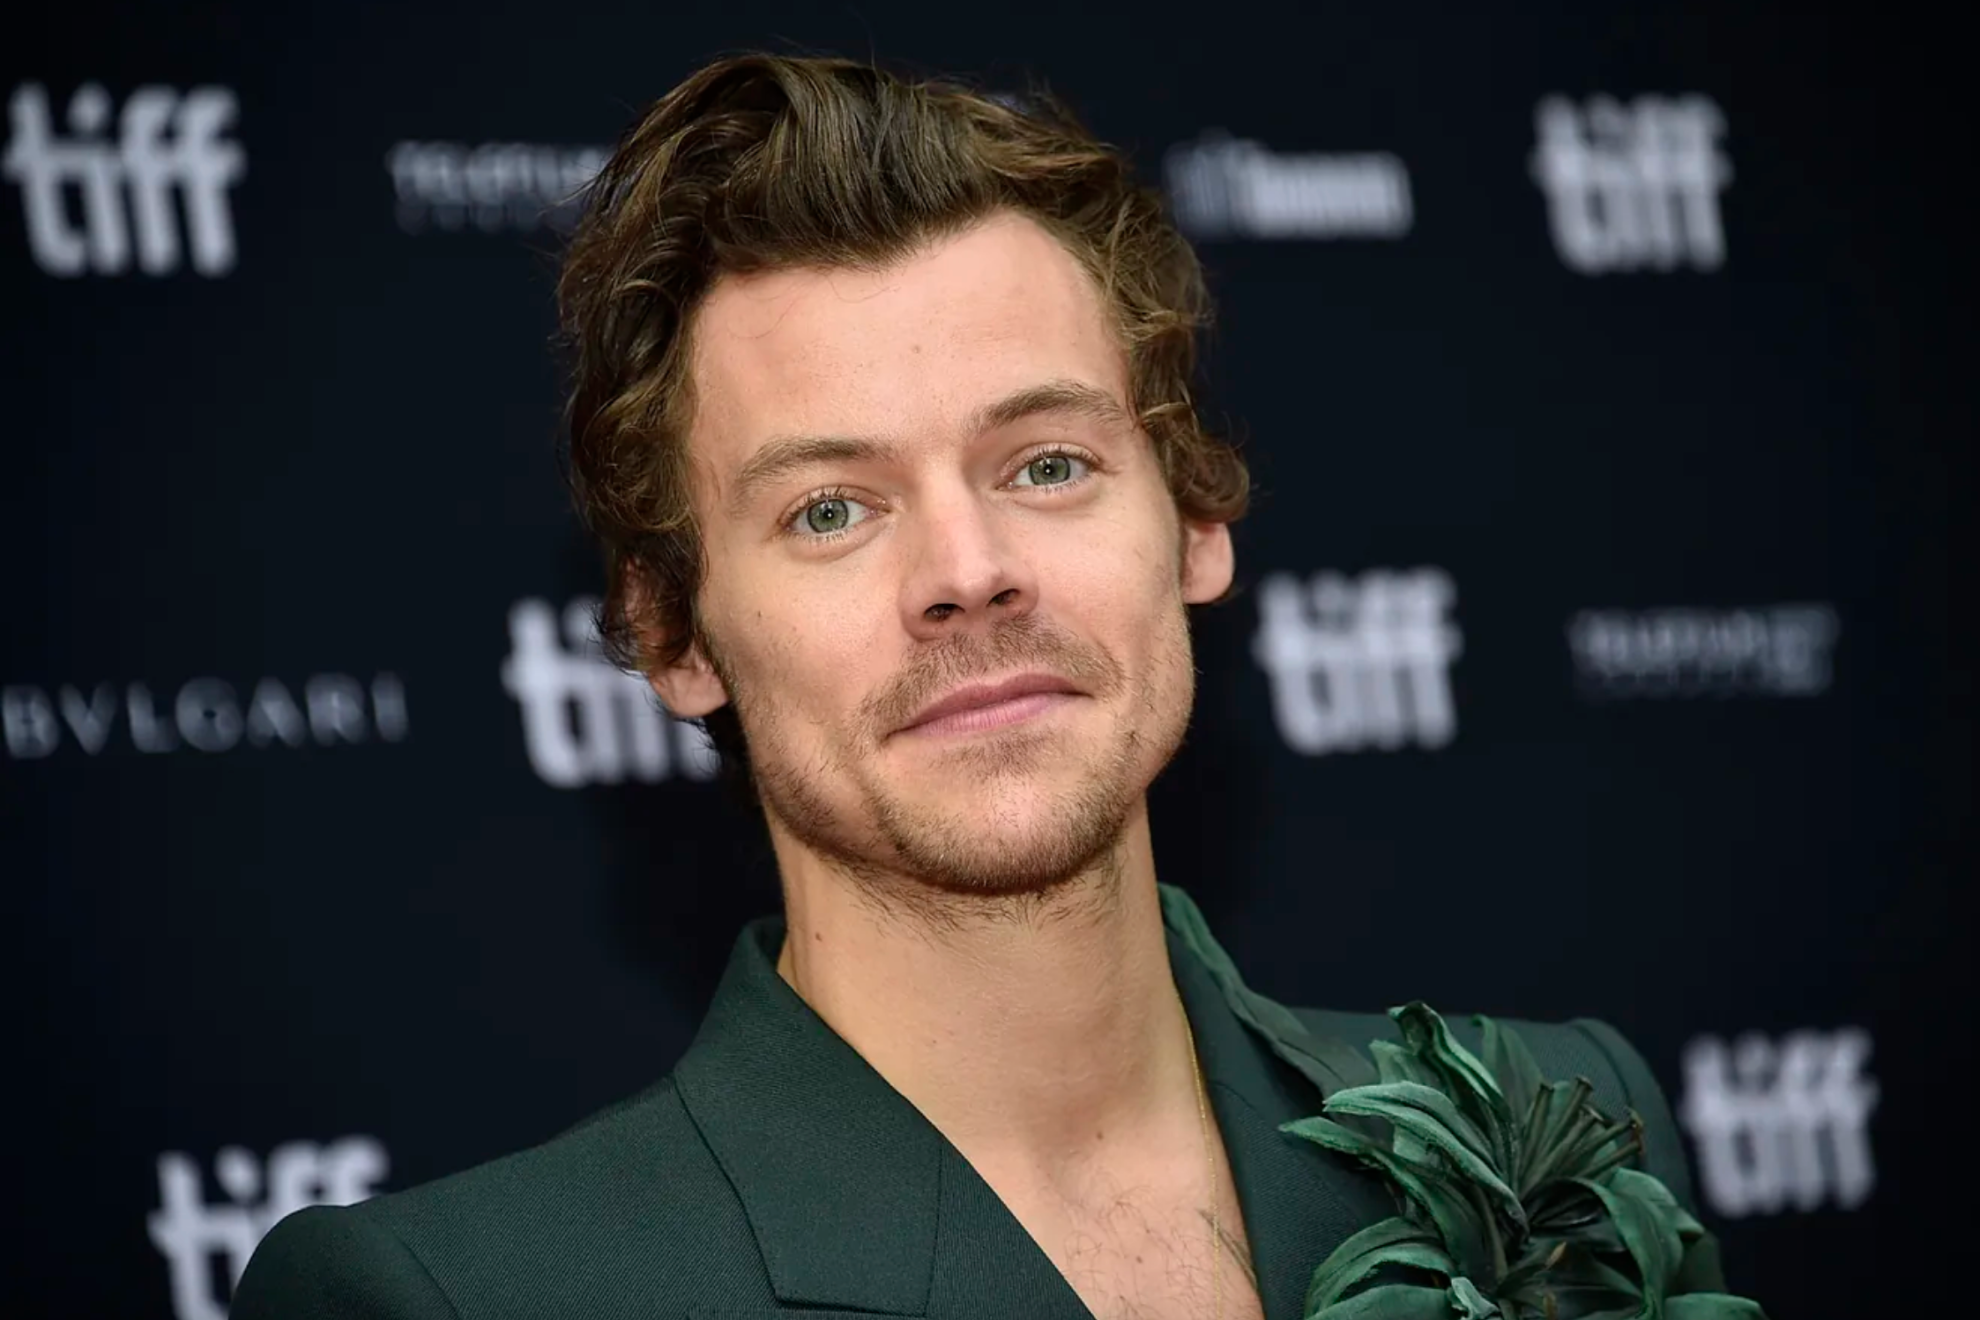 Harry Styles fan to go to prison for stalking: what happened to him?